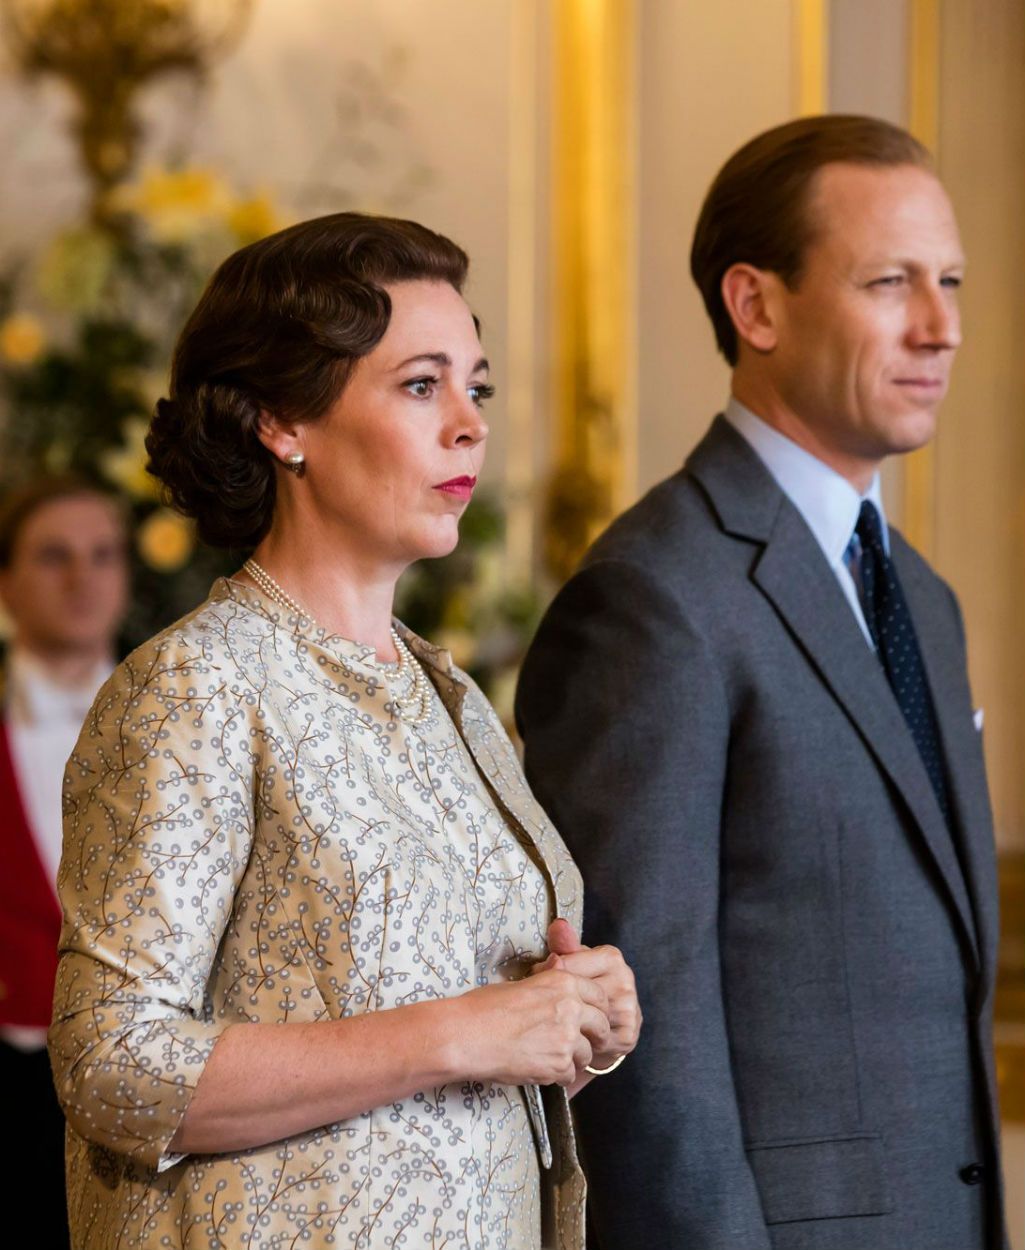 Olivia Coleman and Tobias Menzies in The Crown season 3 VERTICAL